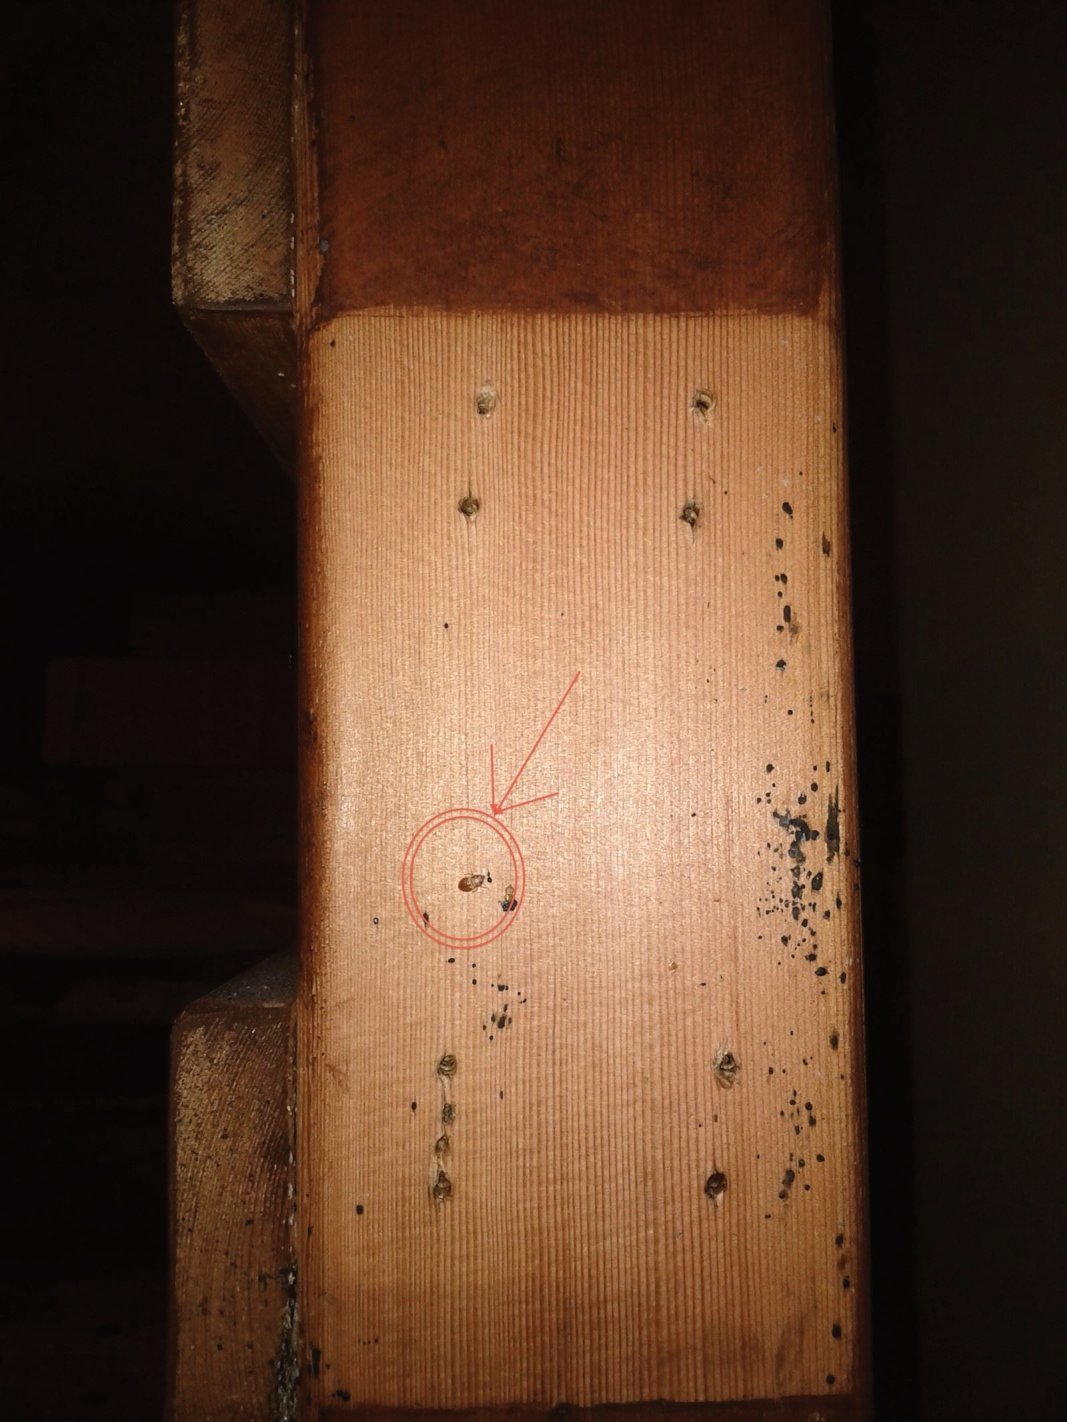 You can see a live Bed Bug in the circle.  This Bed Bug was hiding between 2 pieces of wood that were very tightly held together with several screws to make the bed frame.  When we removed the screws & separated the 2 pieces of wood we were surprised to find a live Bed Bug inside.  Just more evidence that these bugs can get into the smallest areas, so to find them & do a proper inspection/treatment, you really need to be thorough.